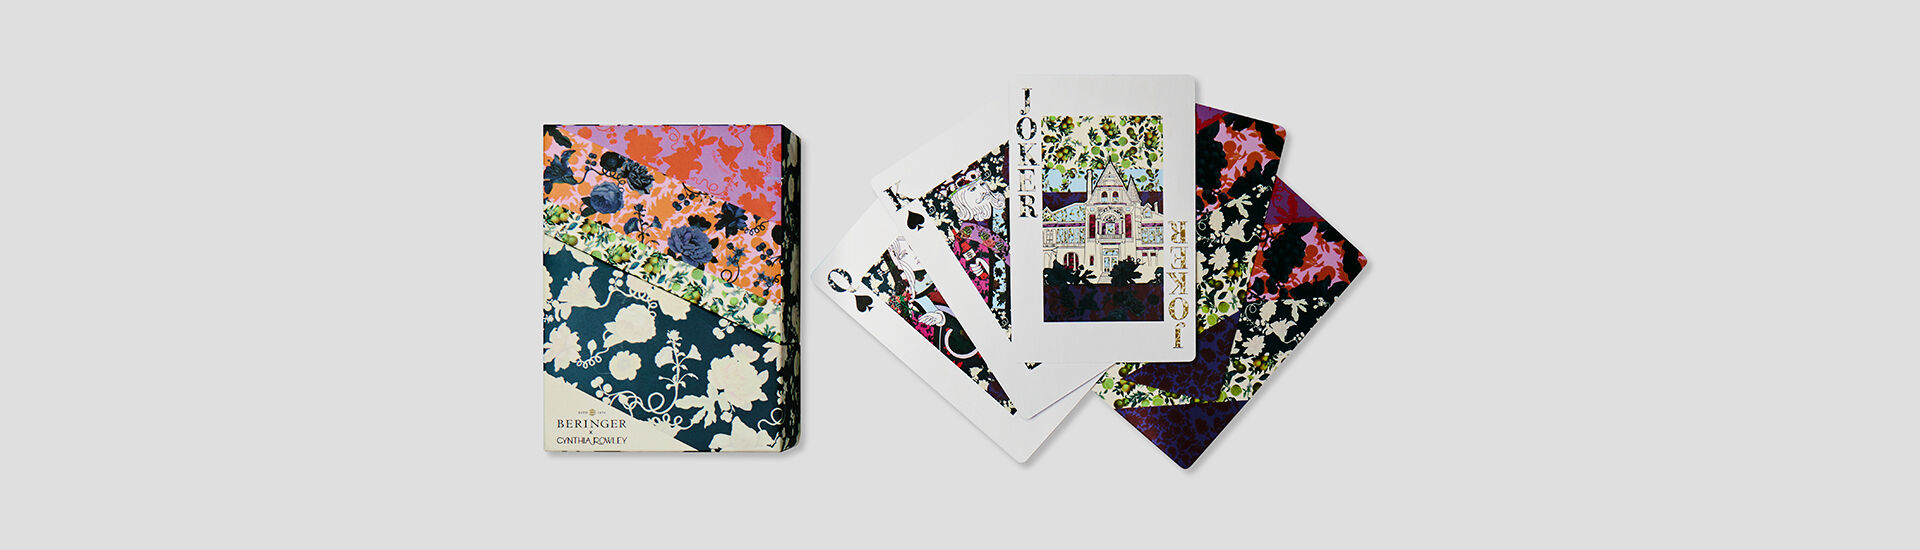 Beringer X Cynthia Rowley Wild & Refined Playing Cards